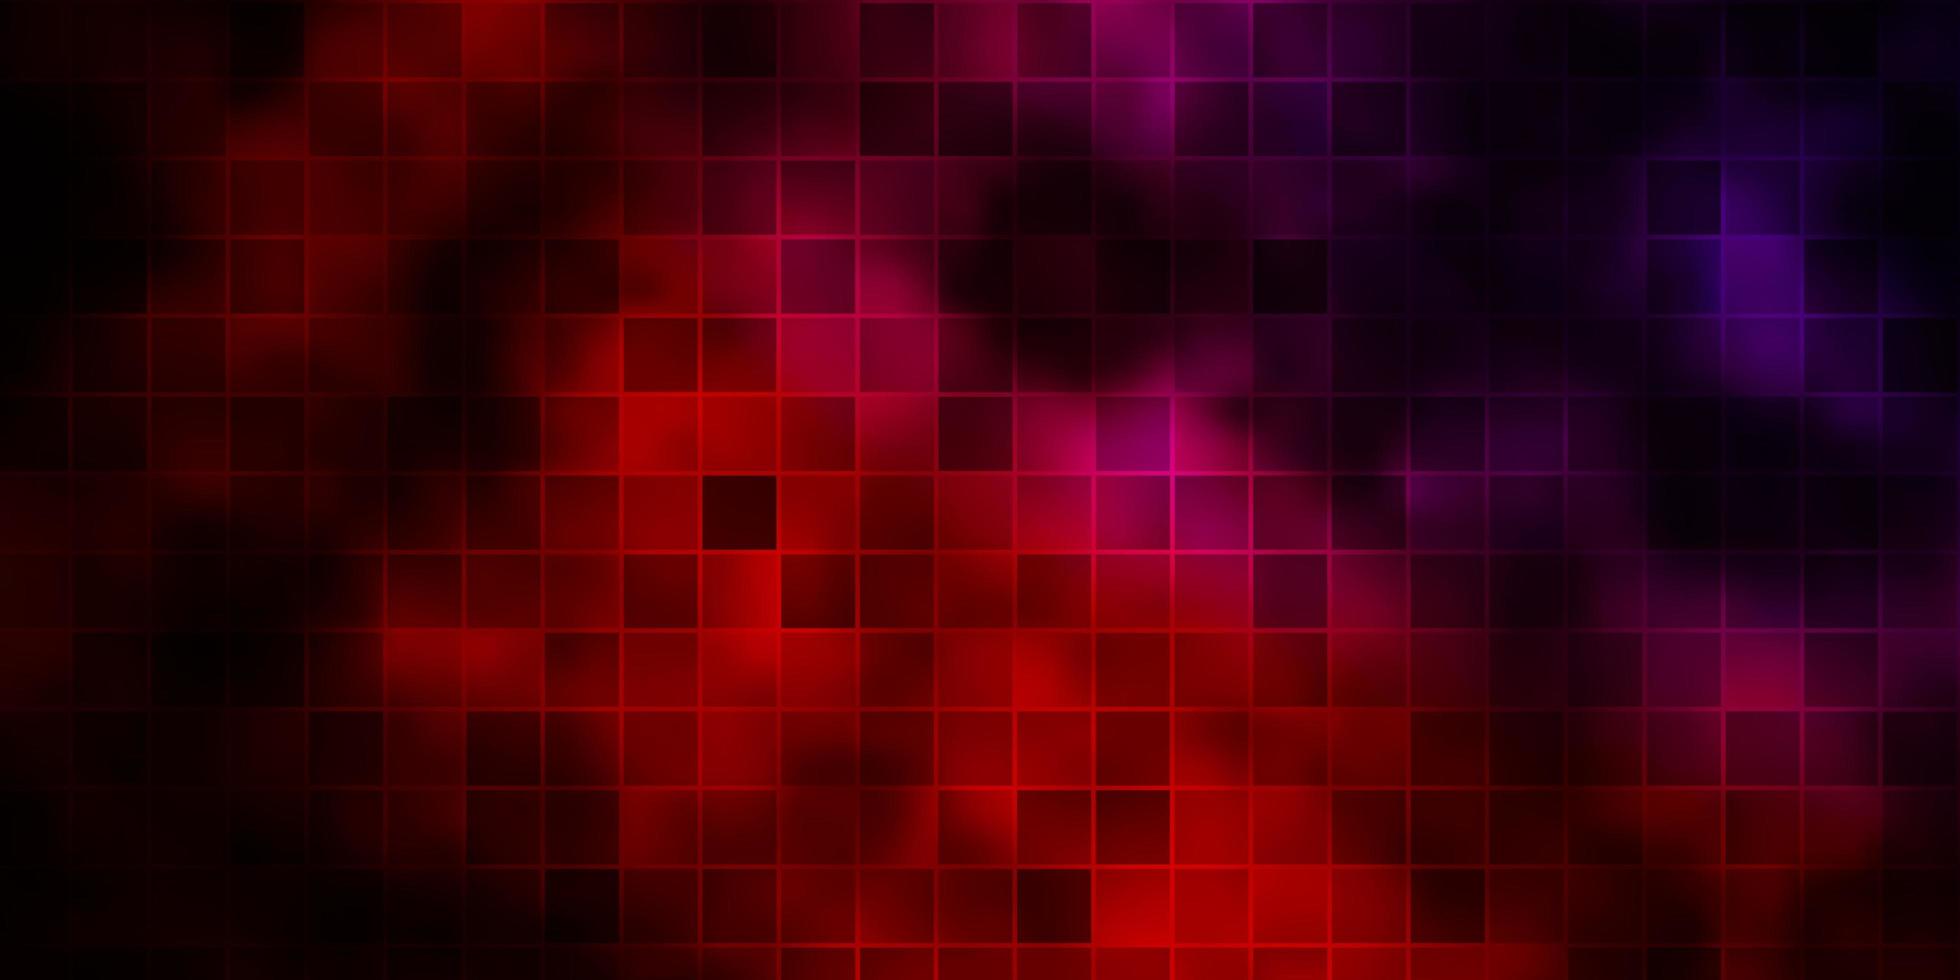 Dark Pink, Red vector background in polygonal style.